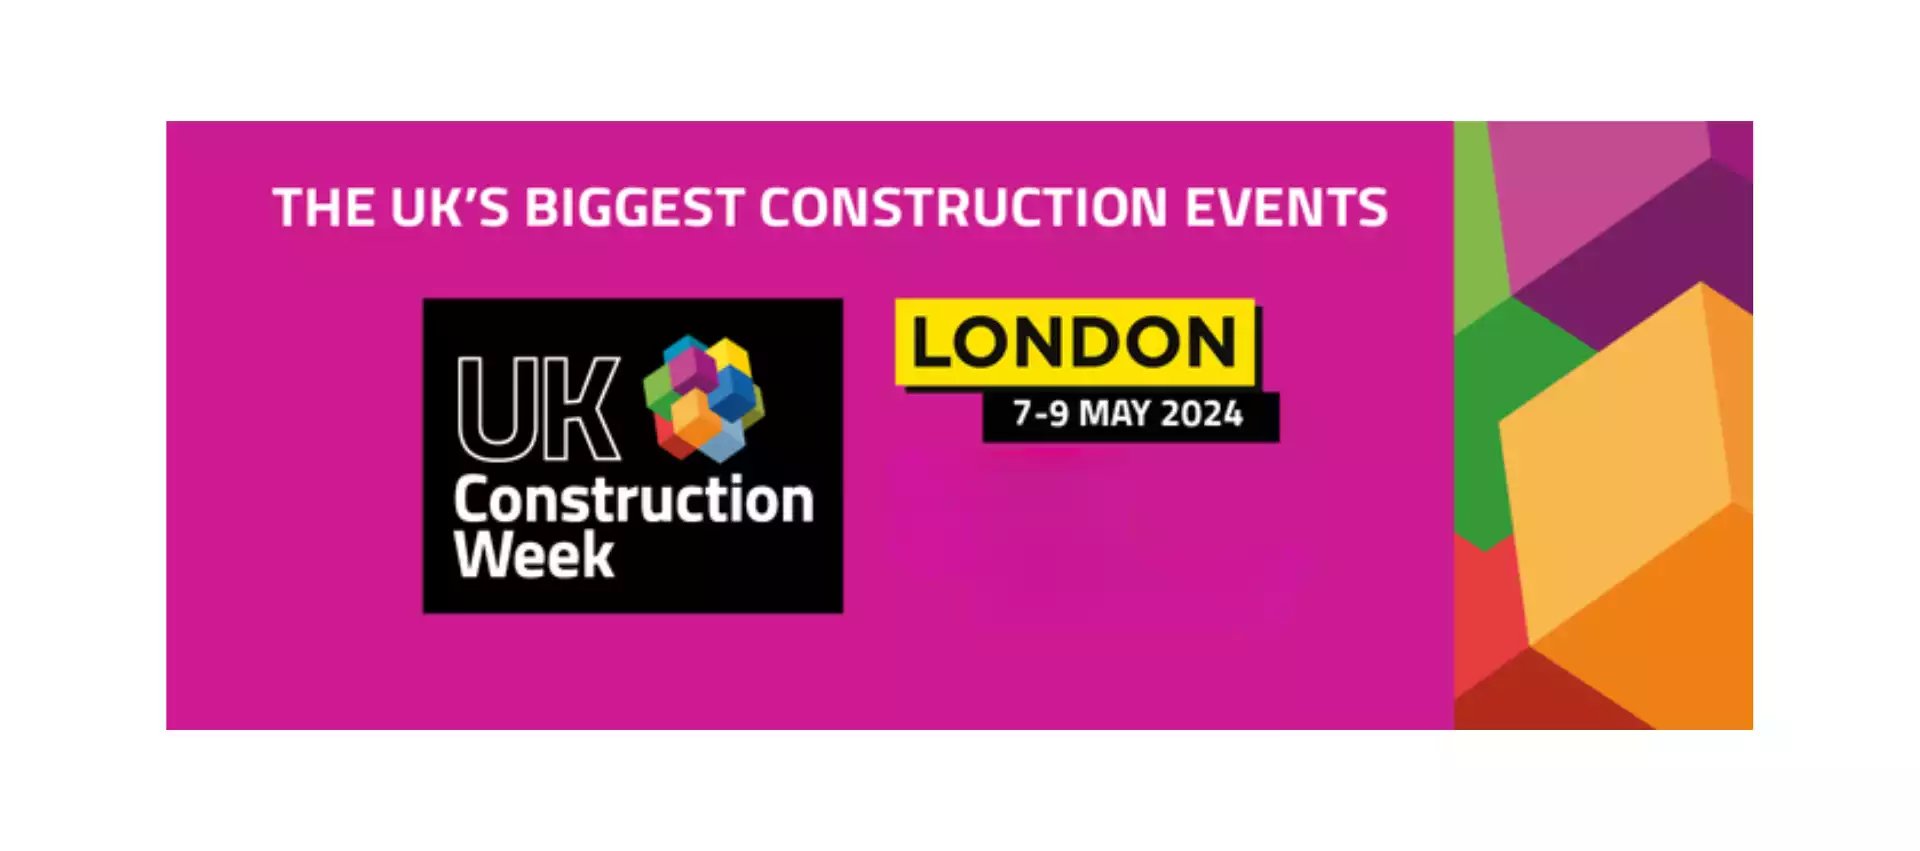 foremost moudular building will attend UK Construction Week (UKCW) 2014